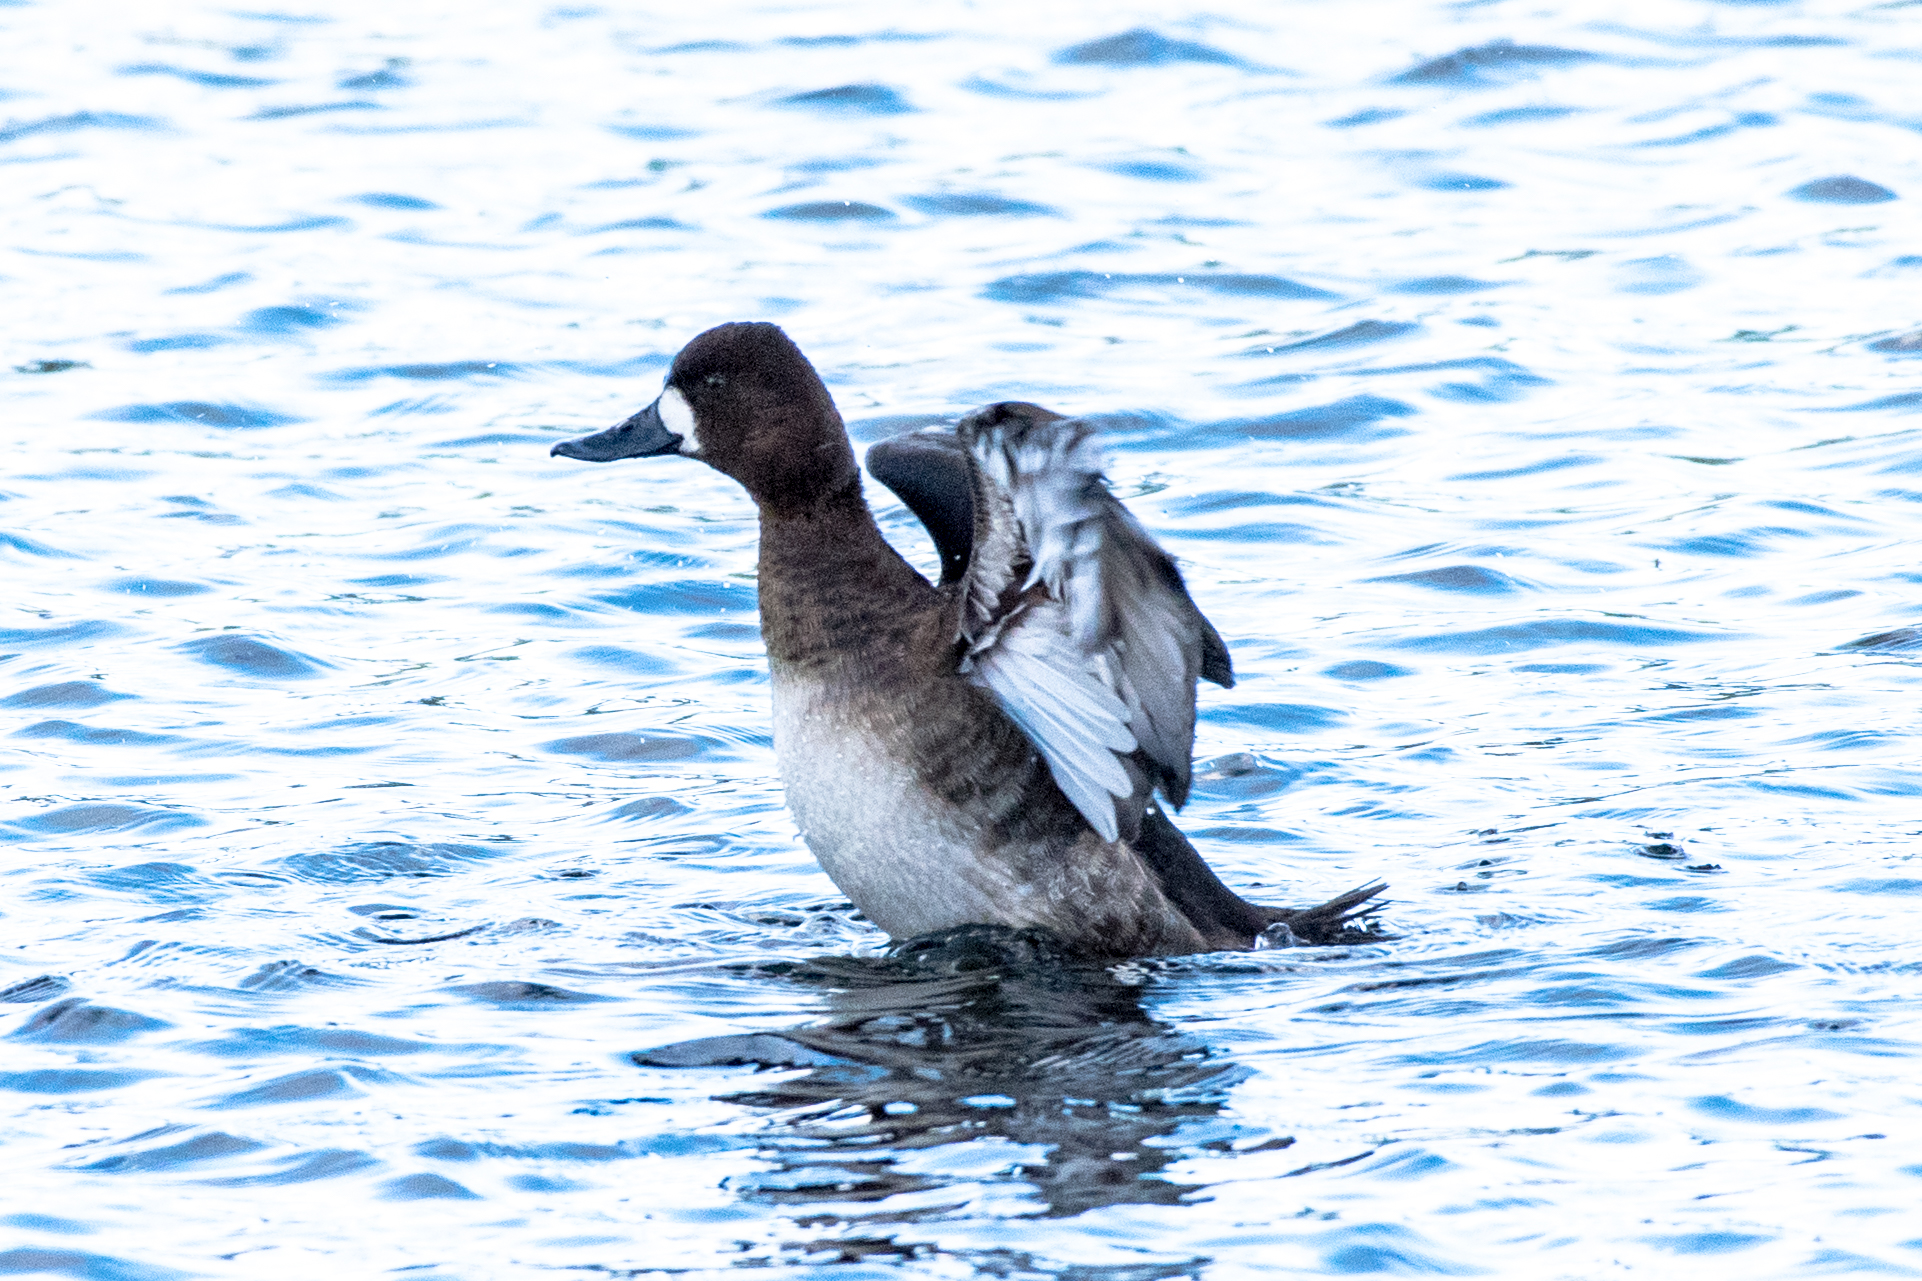   A lesser scaup duck was in with a big flock of mallard ducks and Canada geese today on the Connecticut River. &nbsp;I just happened to spot this little guy in the mob of geese.  